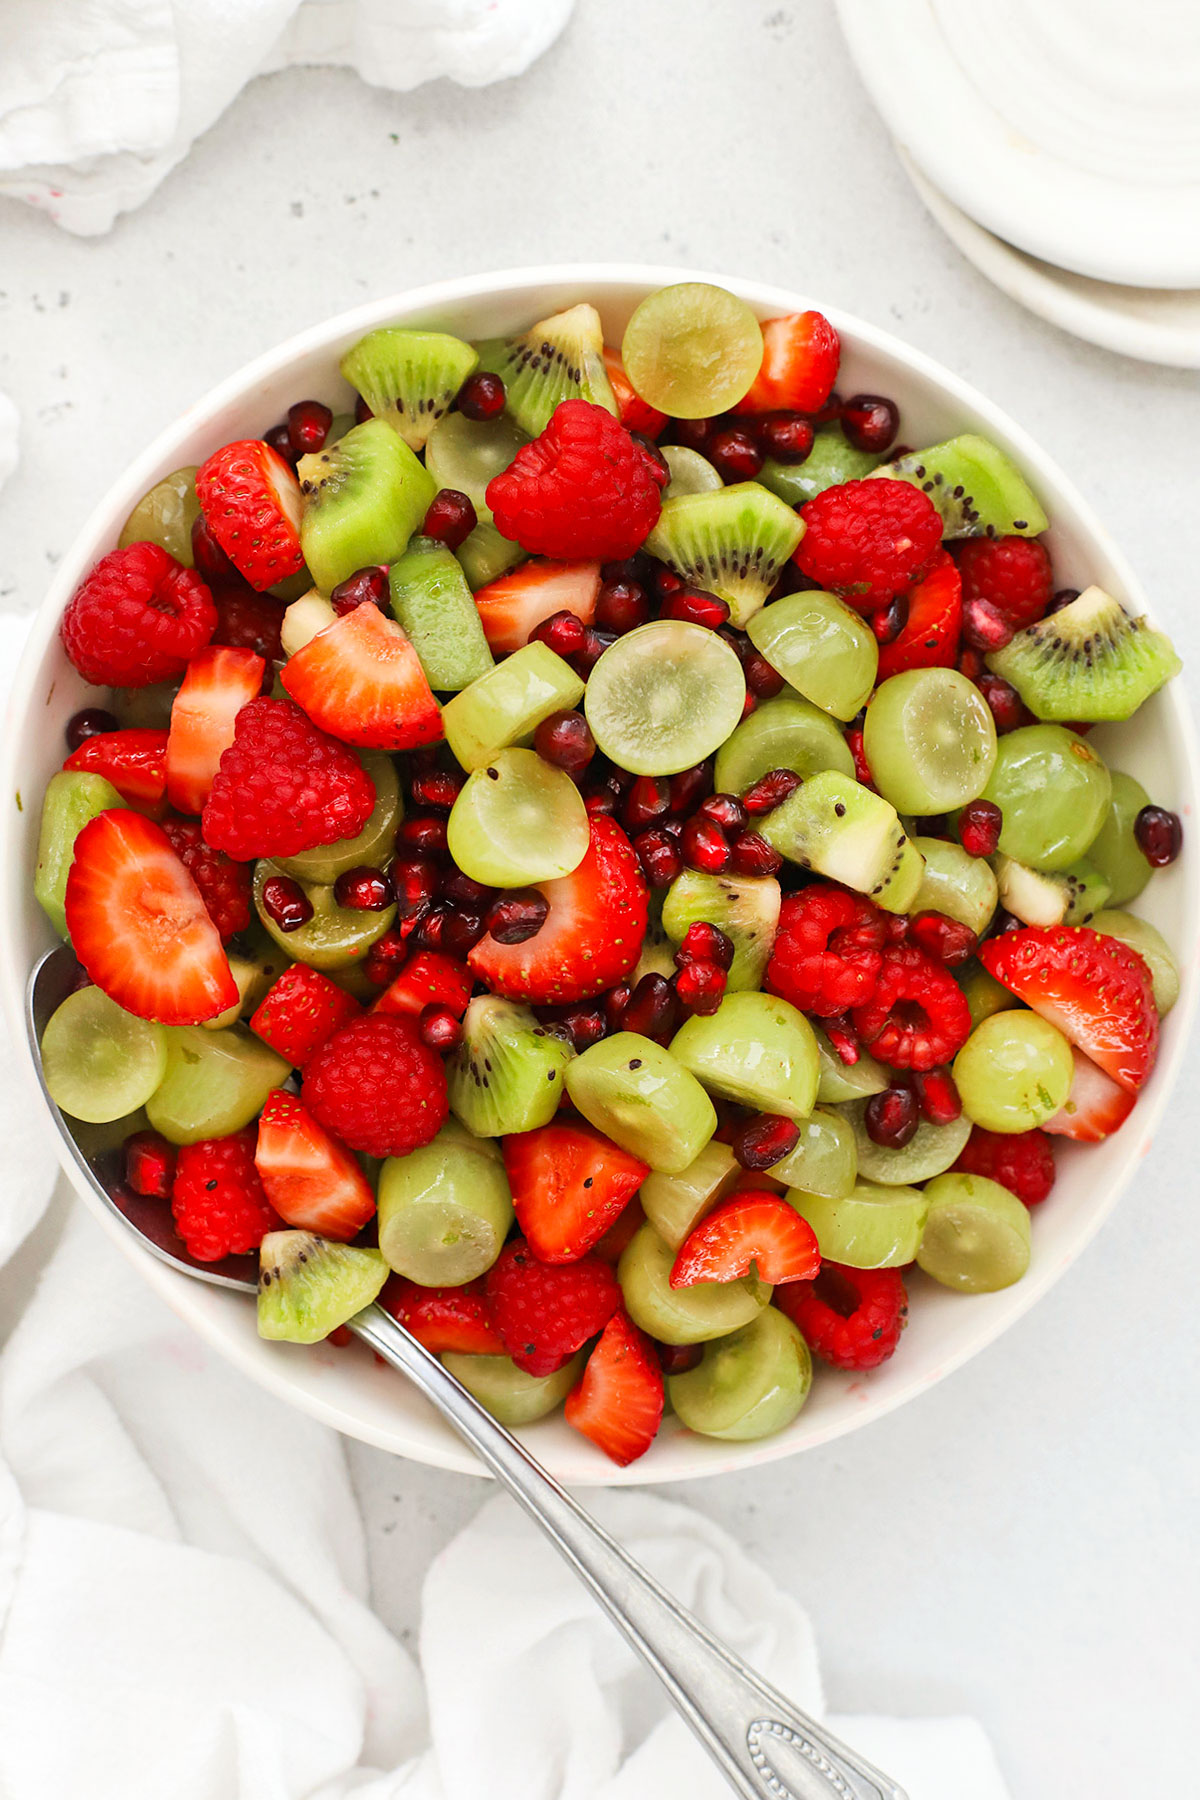 Christmas fruit salad with green grapes, strawberries, raspberries, pomegranate, and kiwi